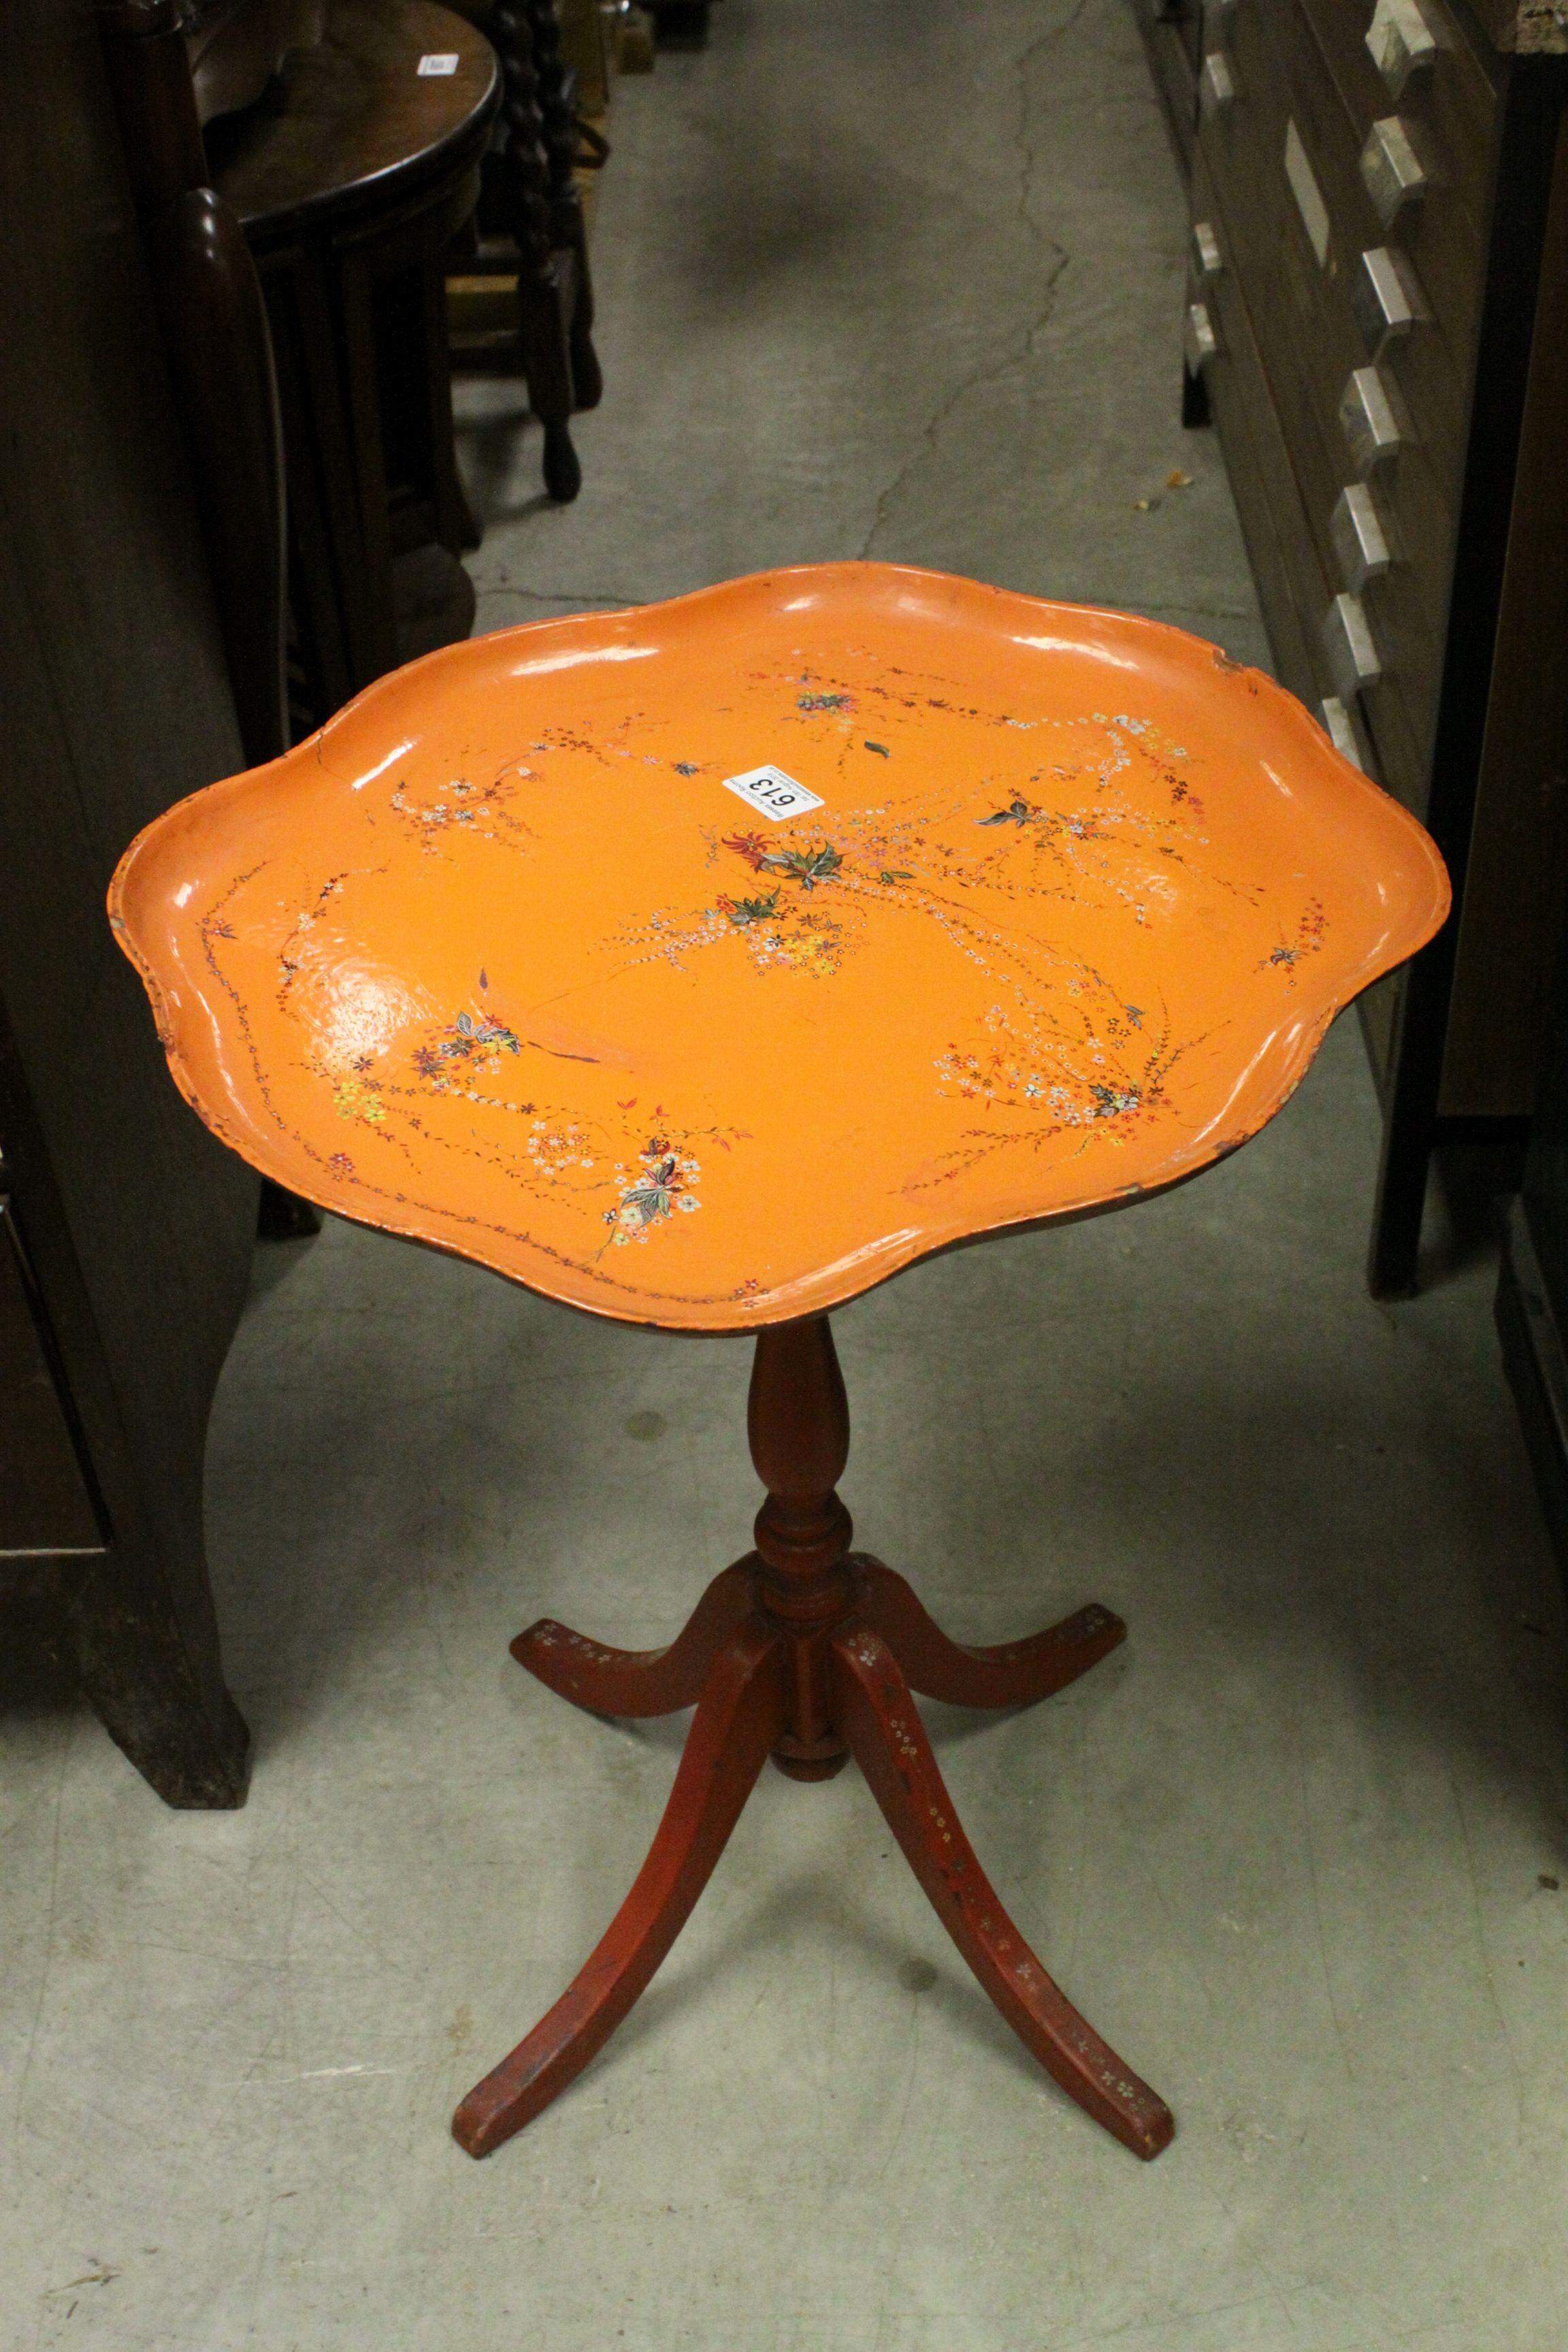 19th century Tilt Top Table with Orange Lacquered and Painted Papier Mache Shaped Top - Image 4 of 4